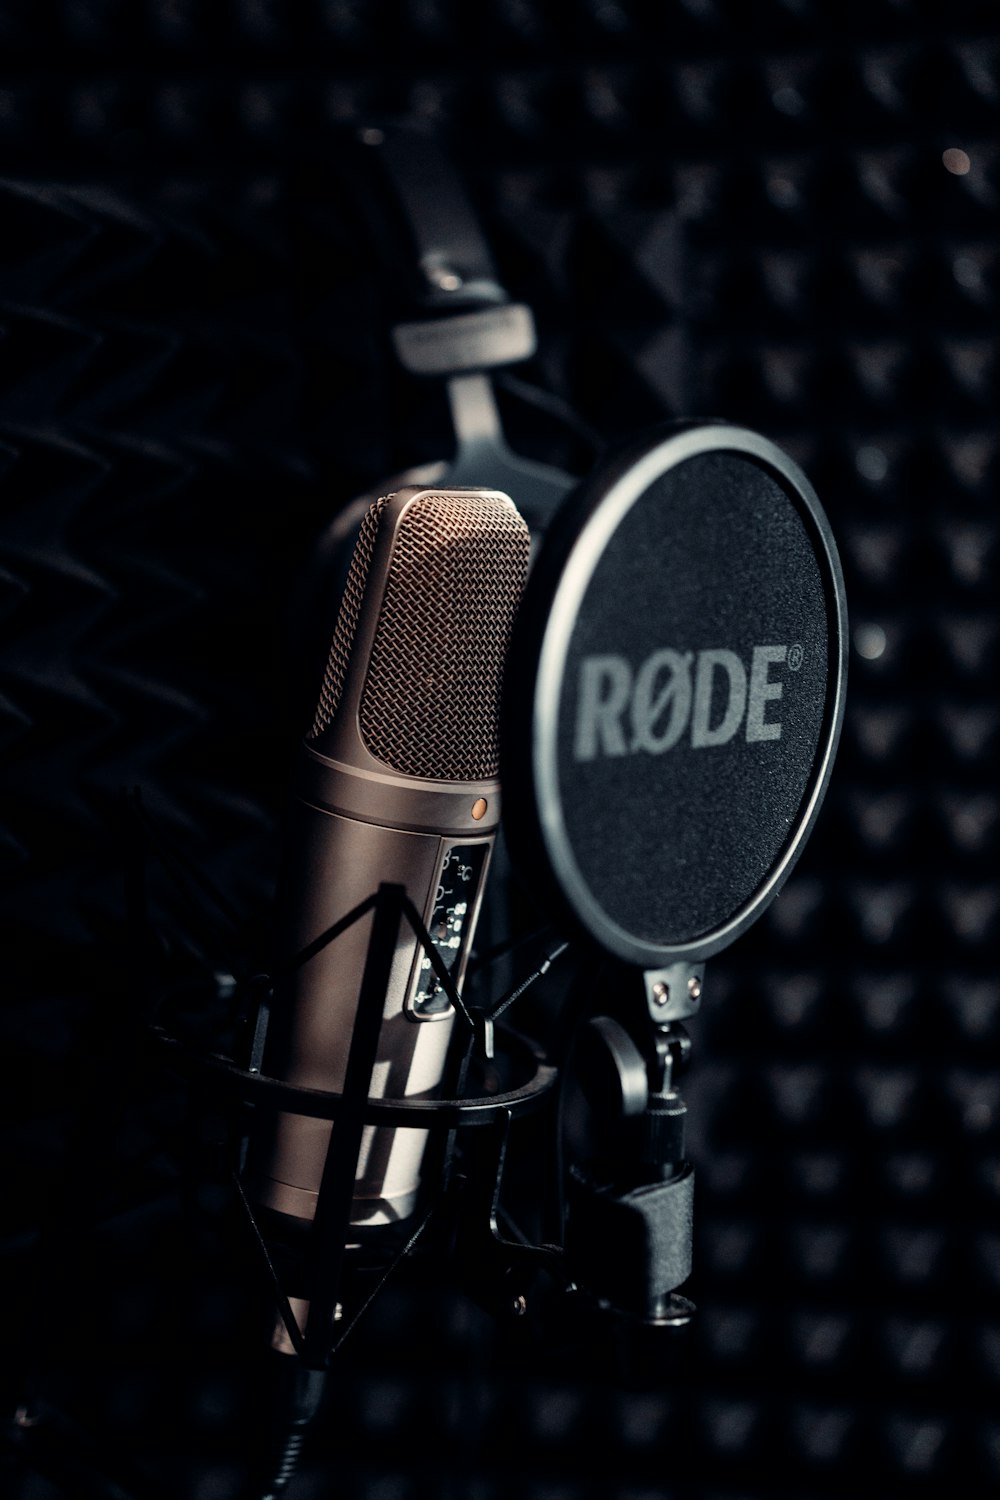 a rode microphone with the word rode on it